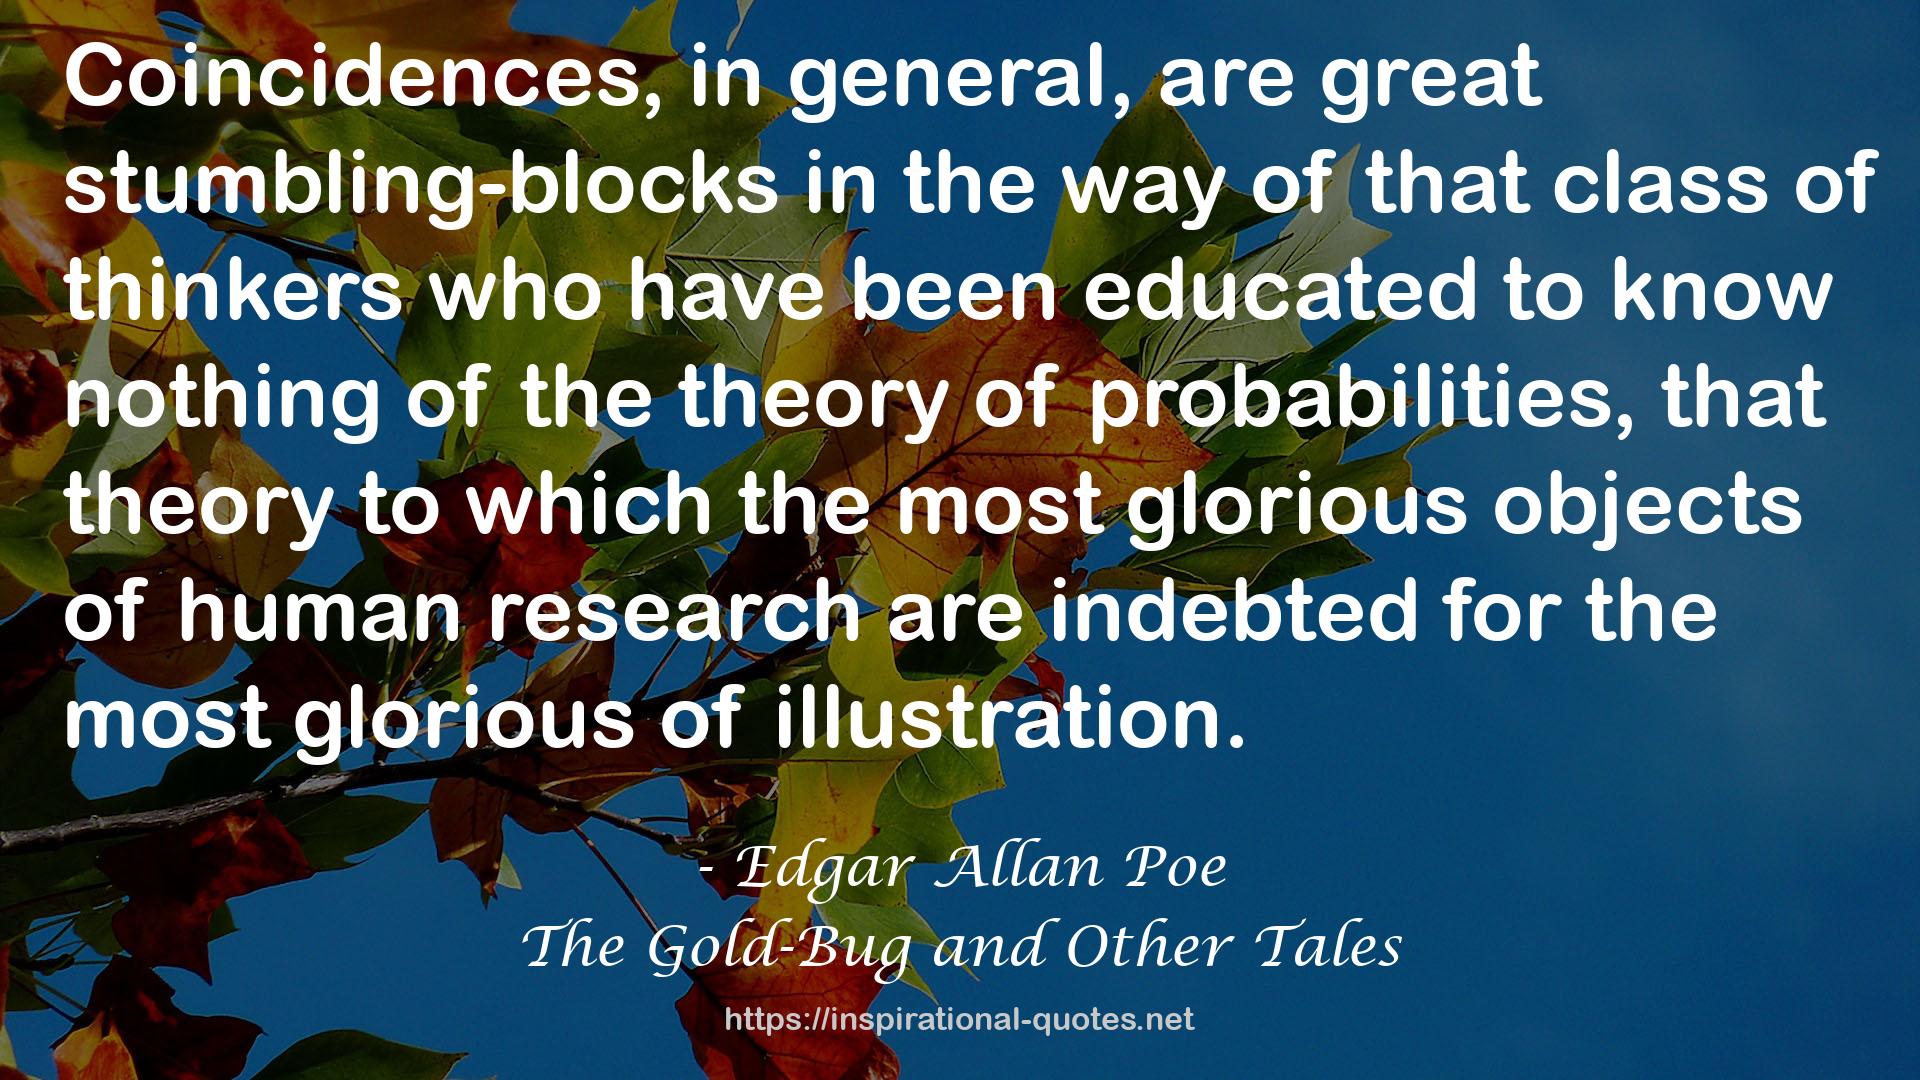 The Gold-Bug and Other Tales QUOTES